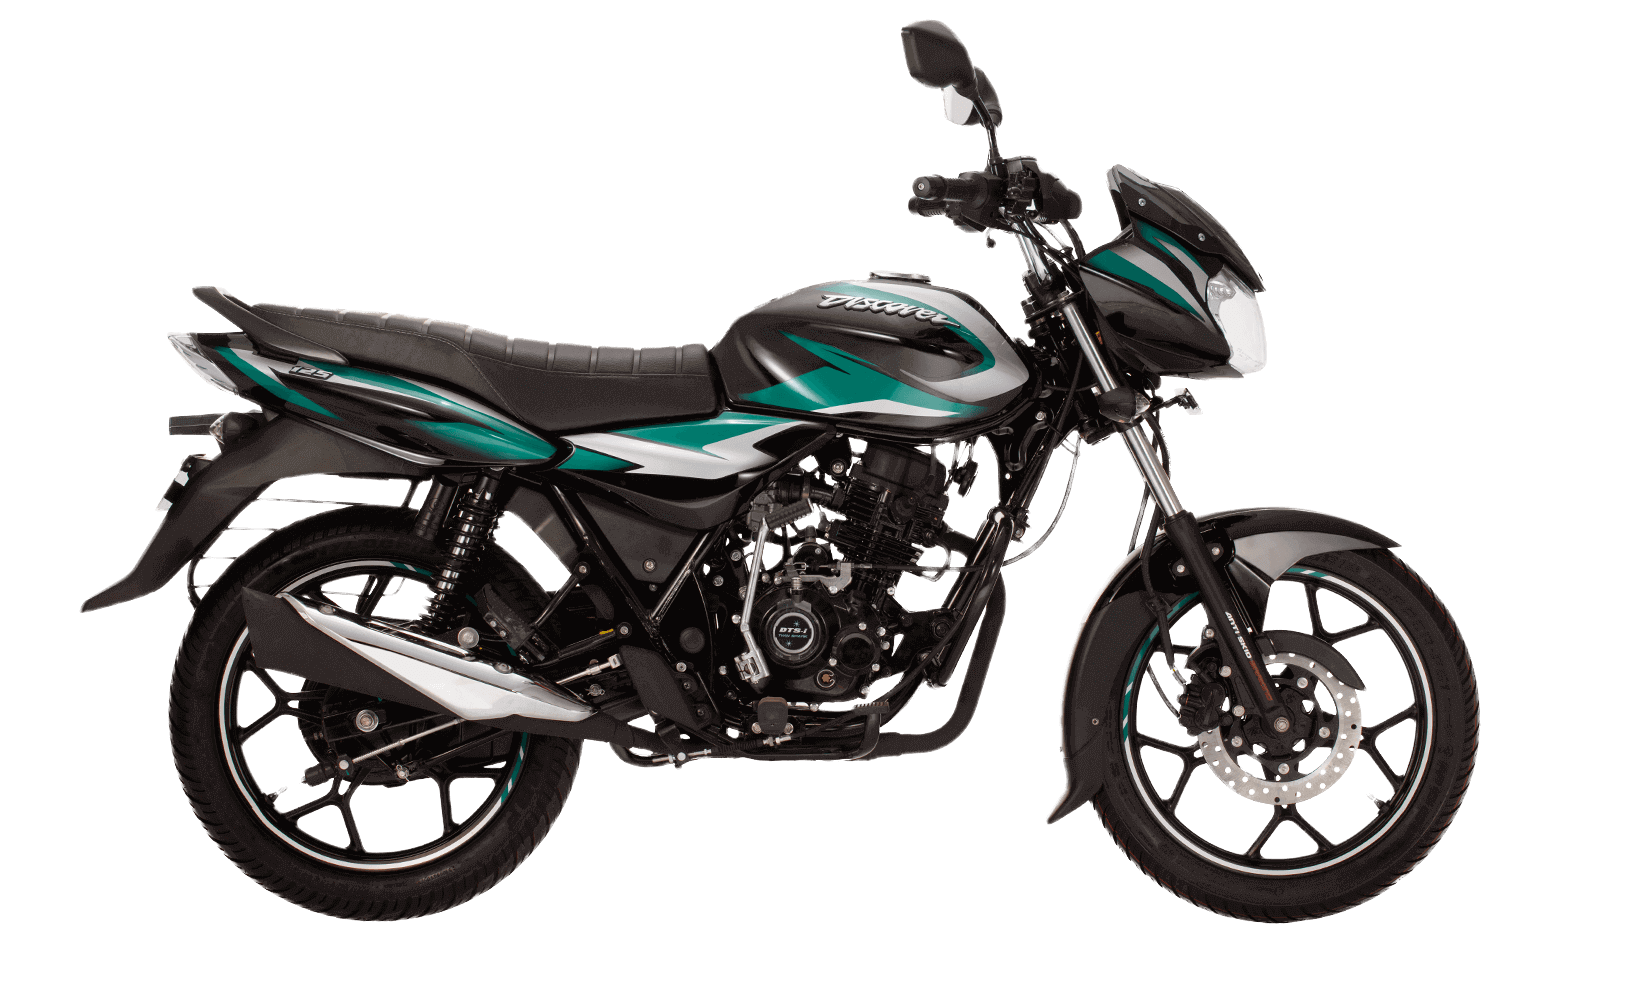 Black and green color bajaj discover 125cc disk new model motorcycle with dtsi engine side view